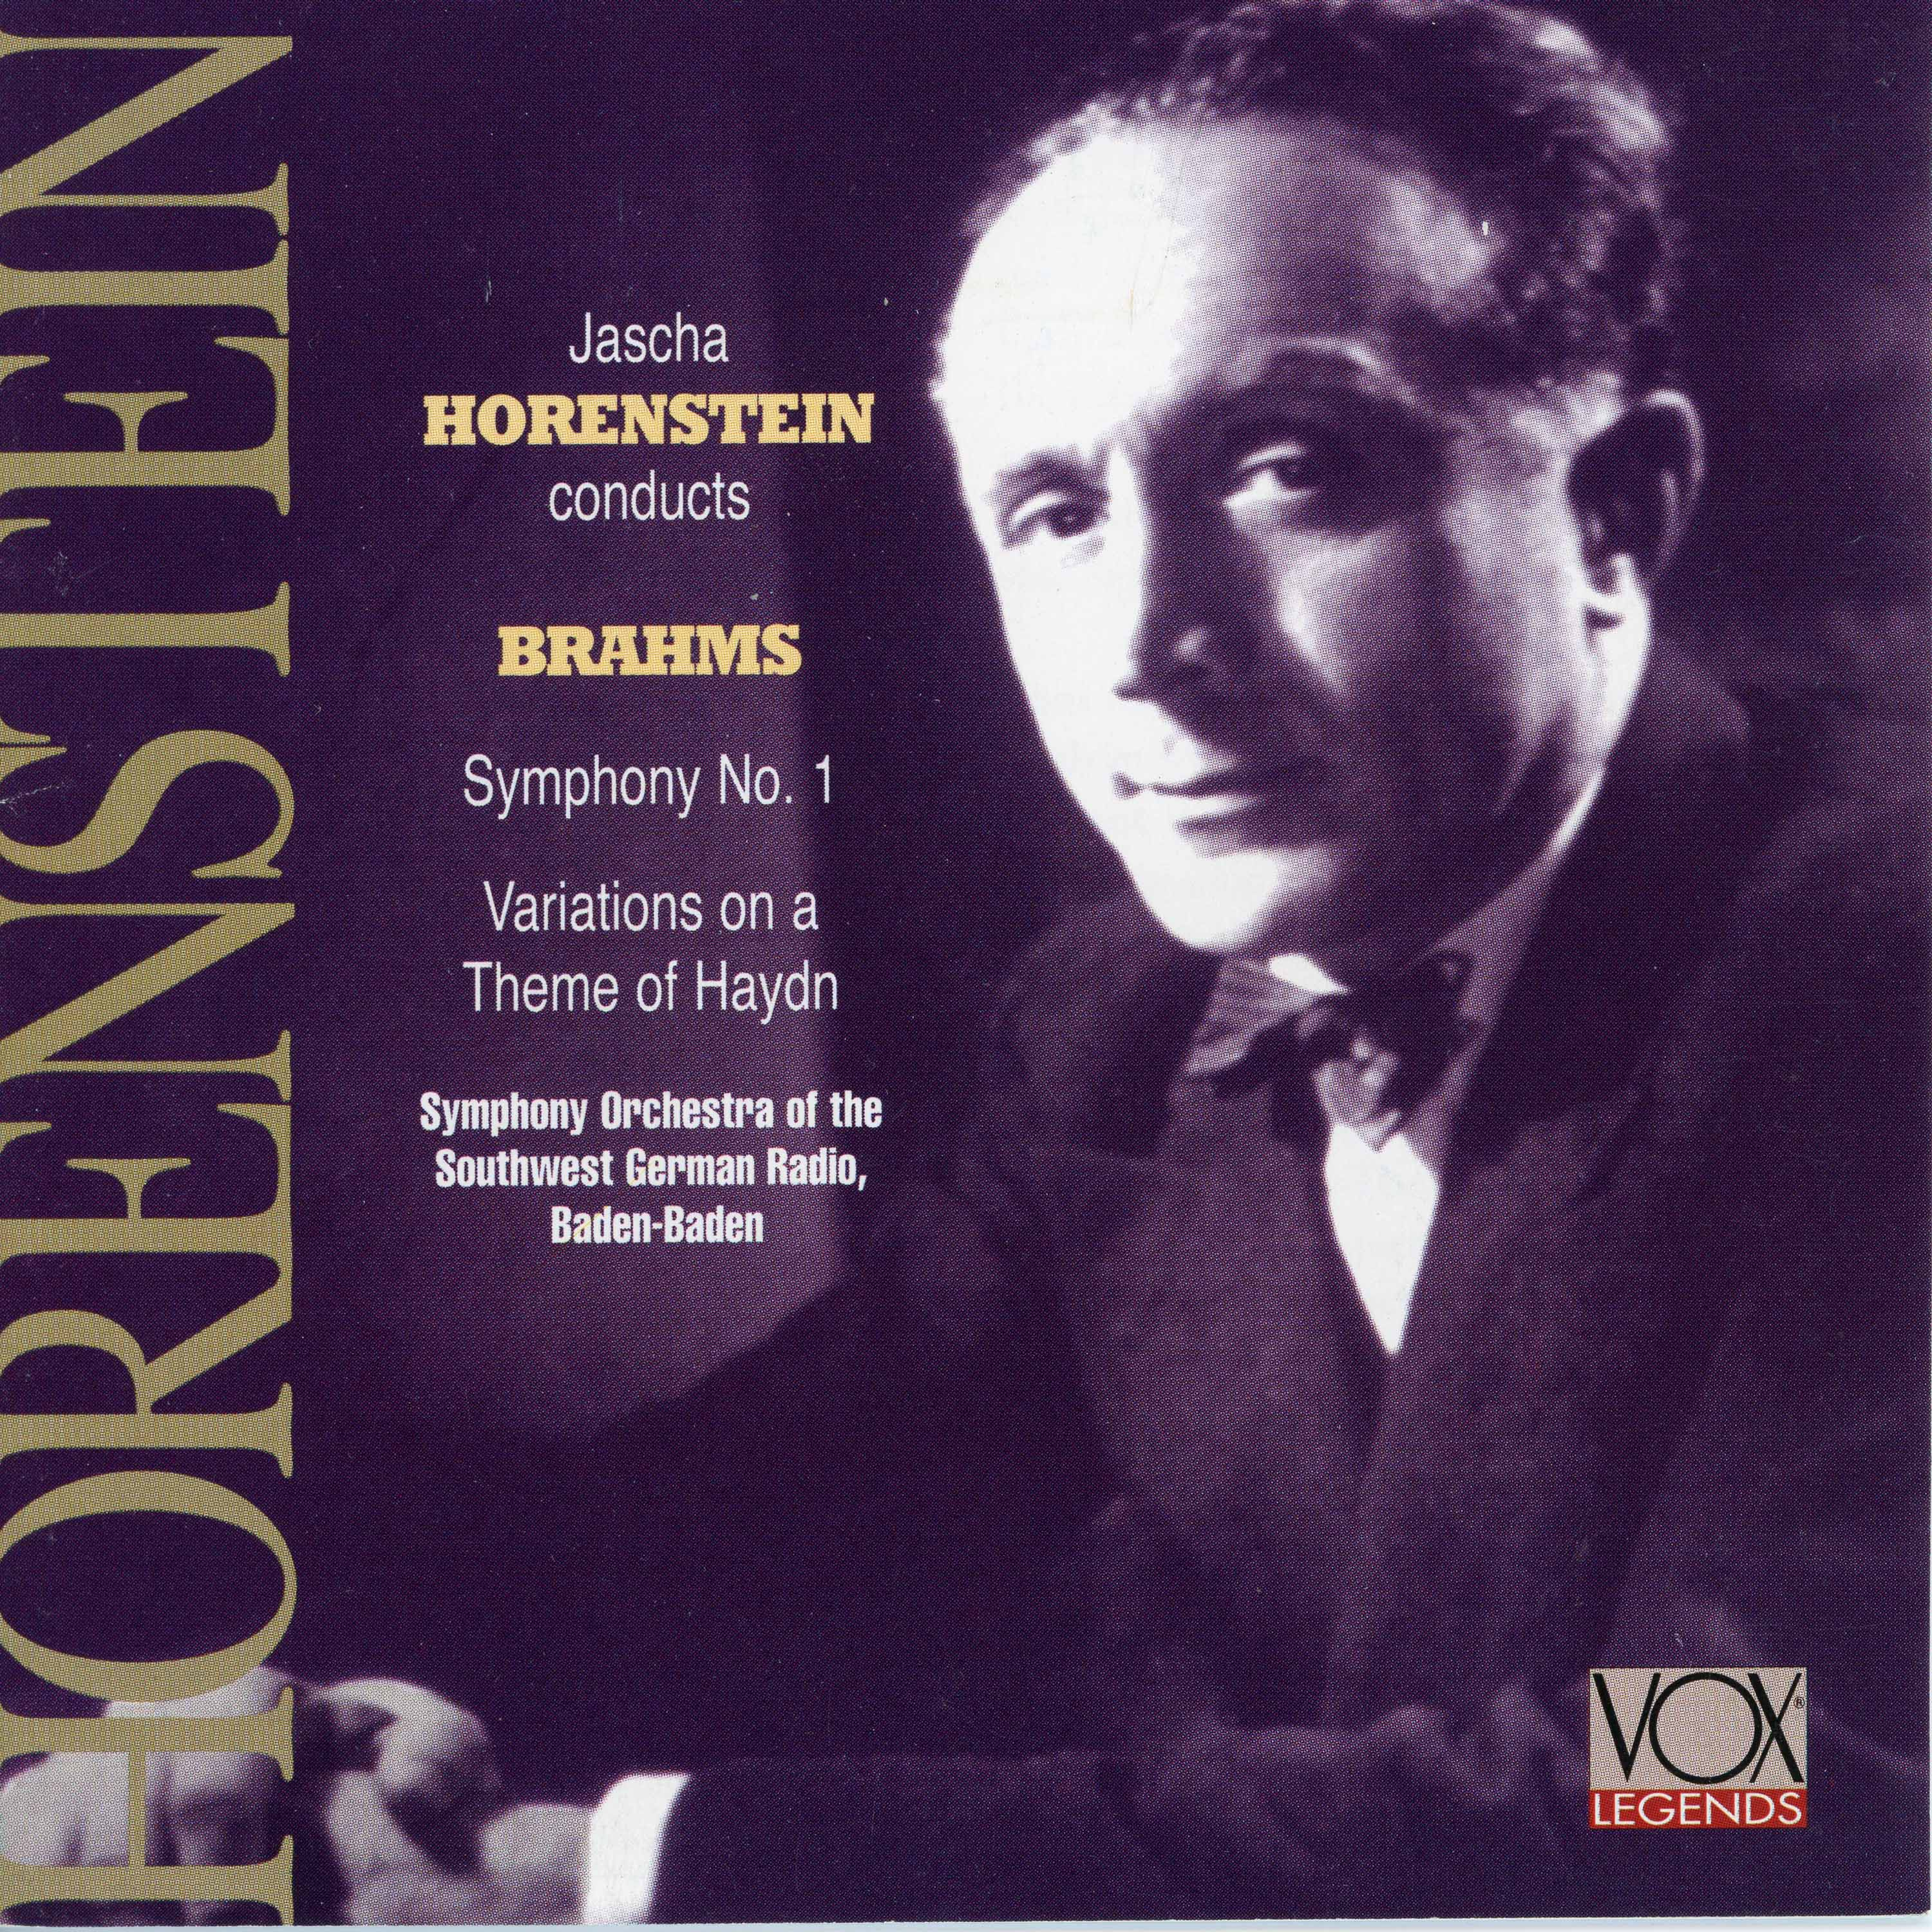 Variations on a Theme by Haydn, Op. 56a "St. Anthony Variations":Variations on a Theme by Haydn, Op. 56a "St. Anthony Variations": Var. 8, Presto non troppo